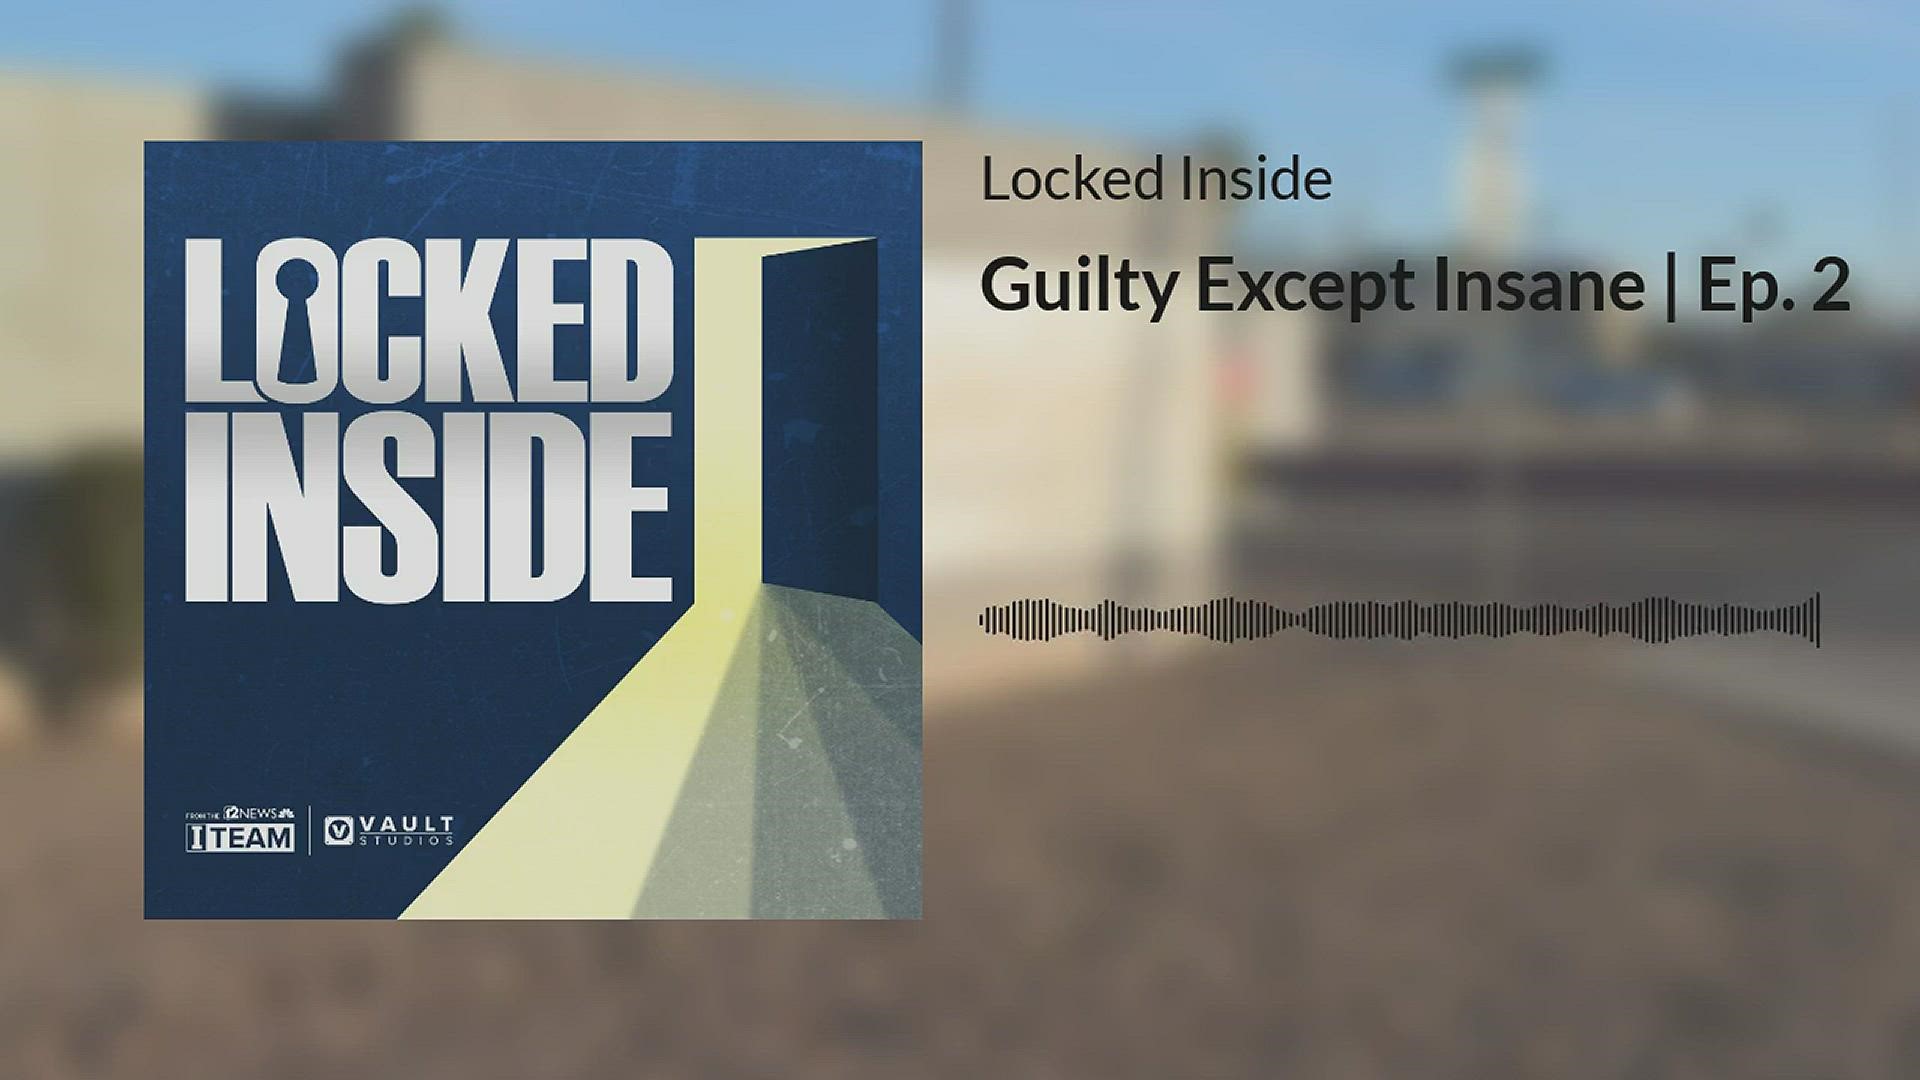 In chapter two of the 12 News Locked Inside podcast, the I-Team looks into what happens when a man pleads Guilty Except Insane after killing his grandparents.